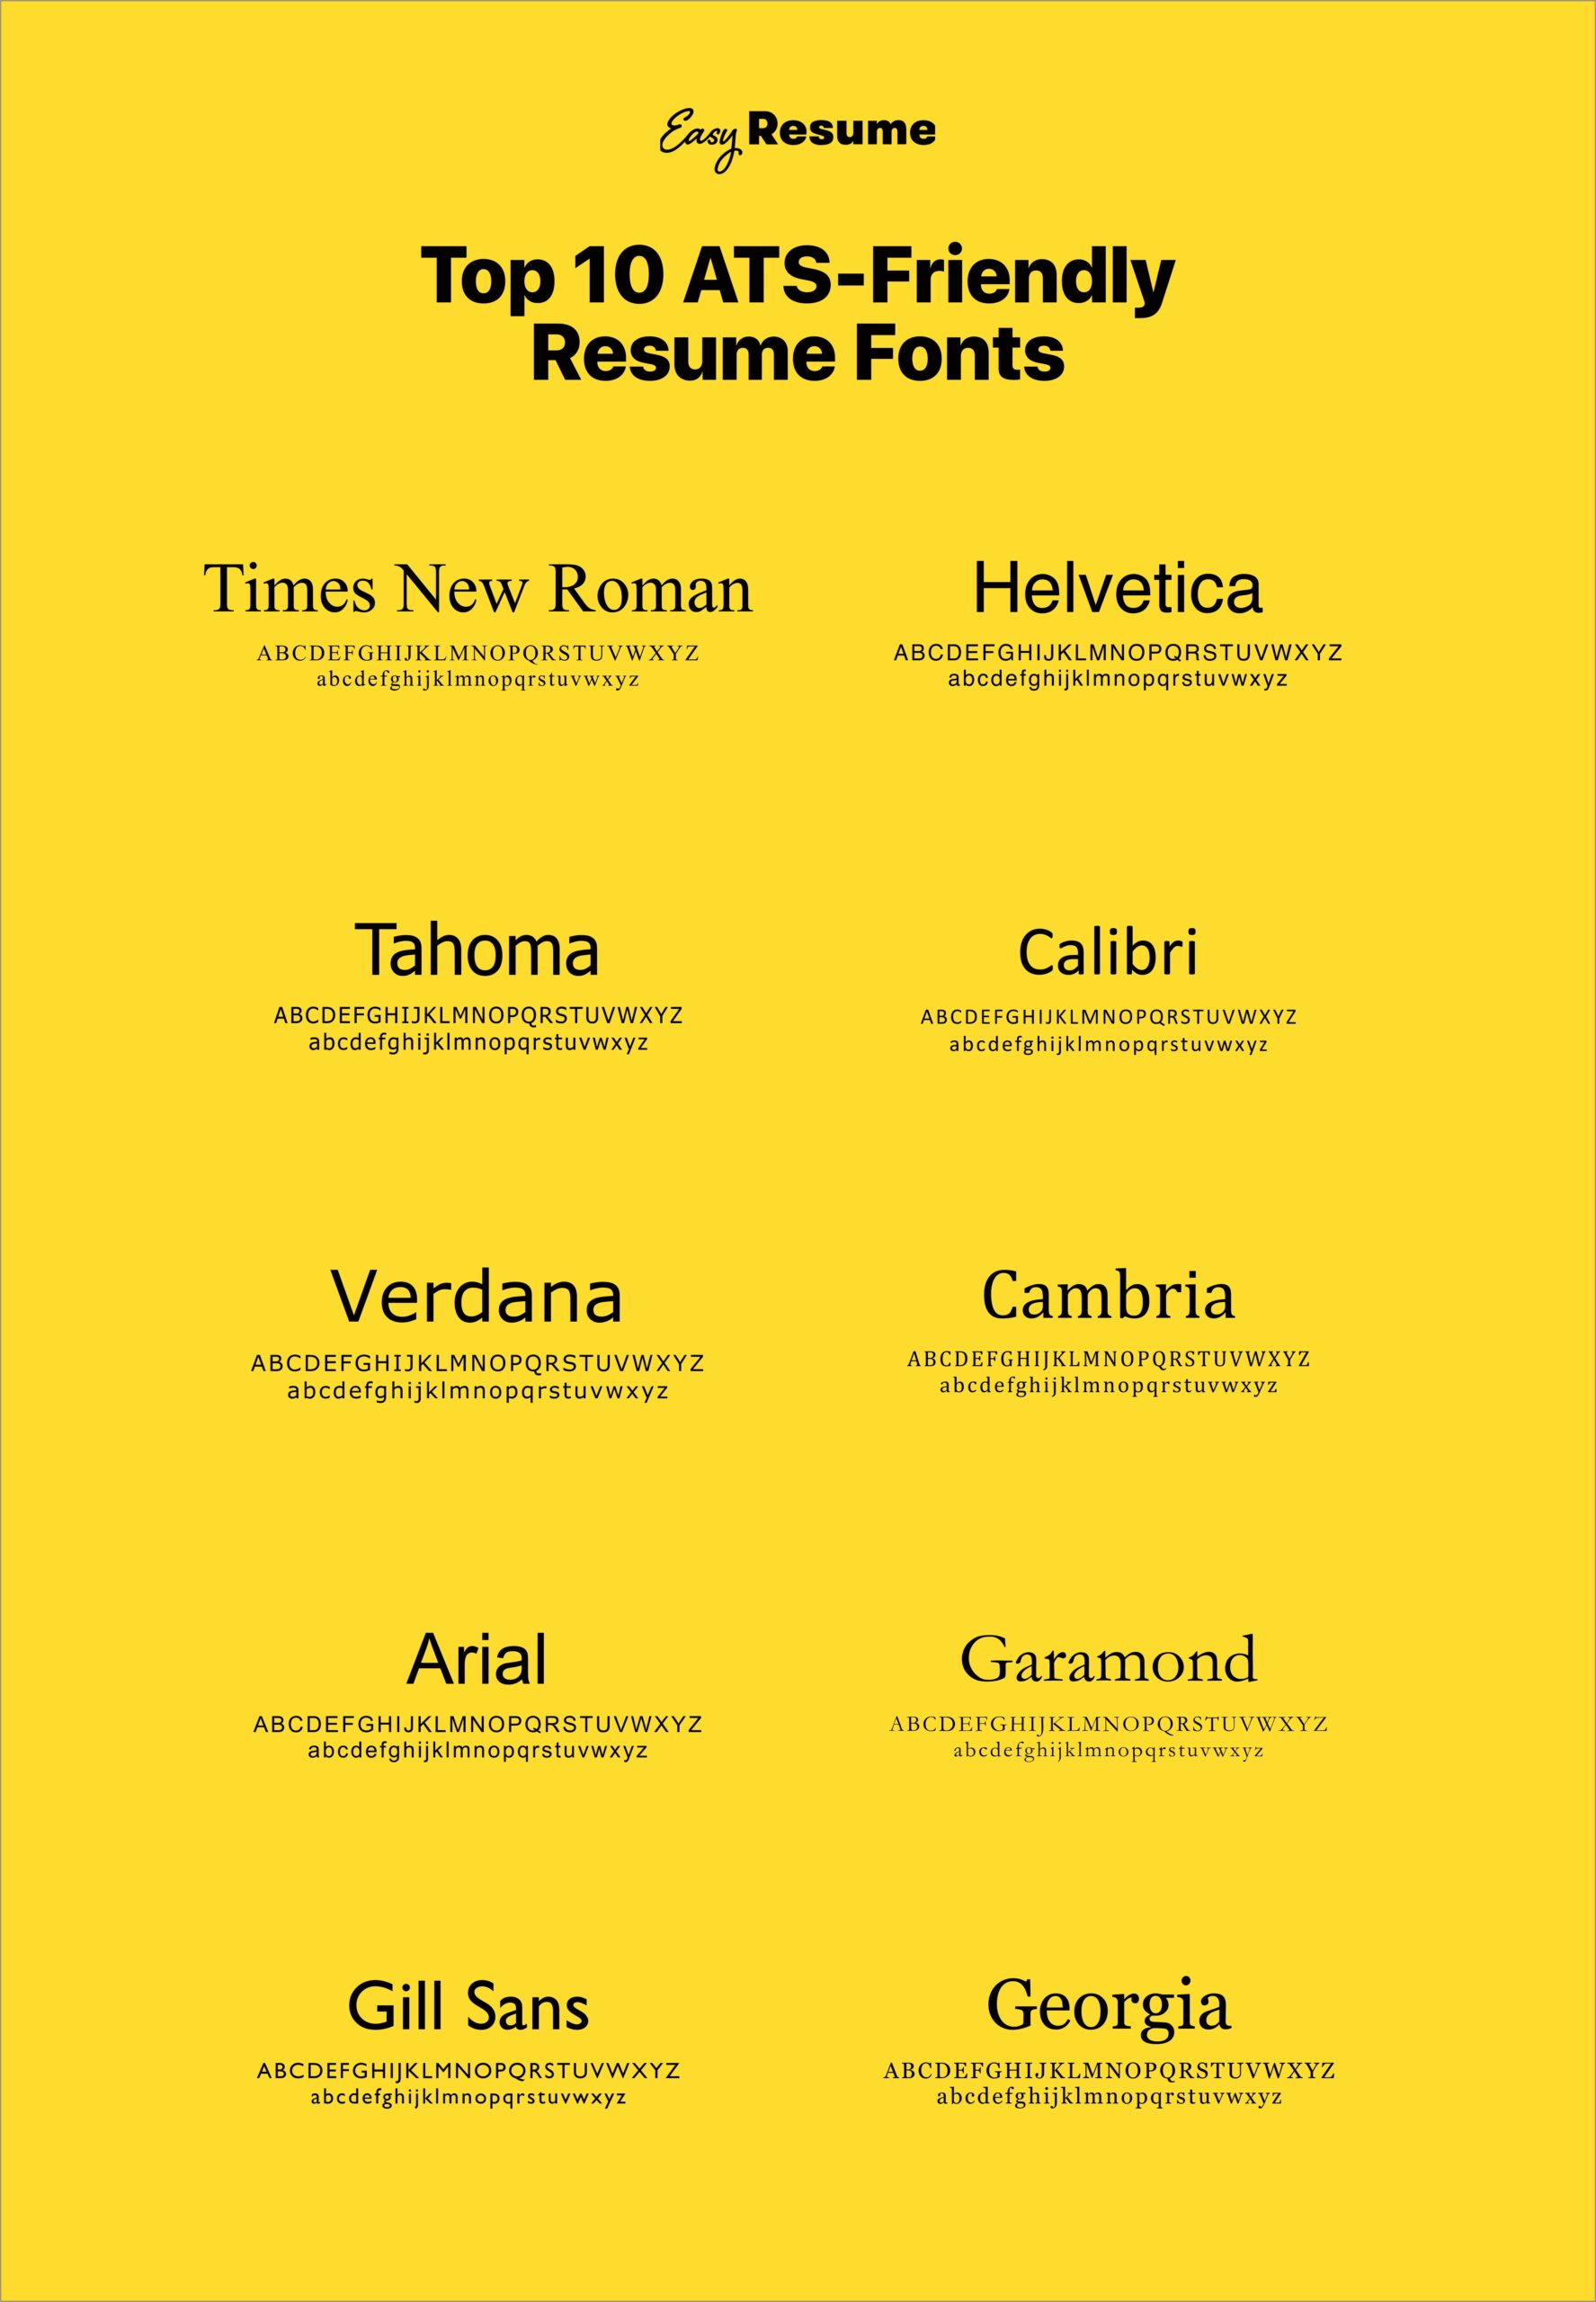 Best Font For A Resume 2016